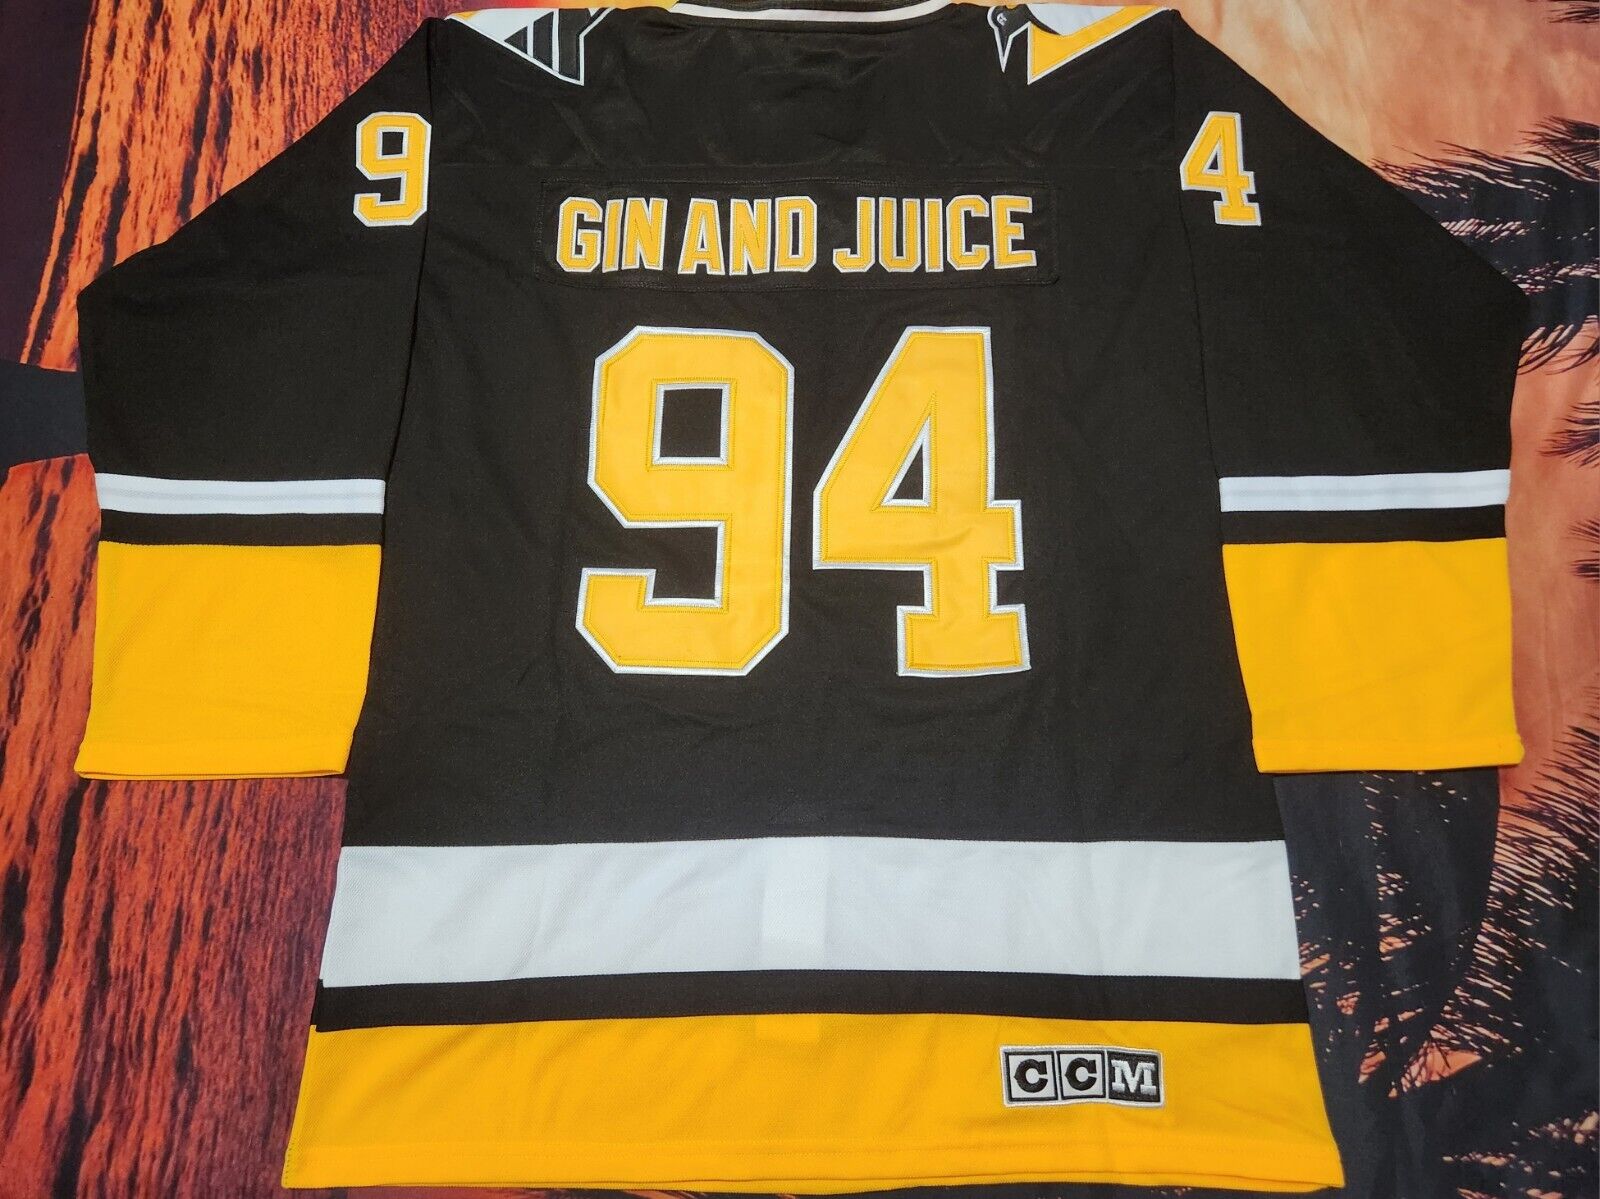 1994 Pittsburgh Penguins Throwback CCM Hockey Jersey GIN AND JUICE Snoop Dogg 